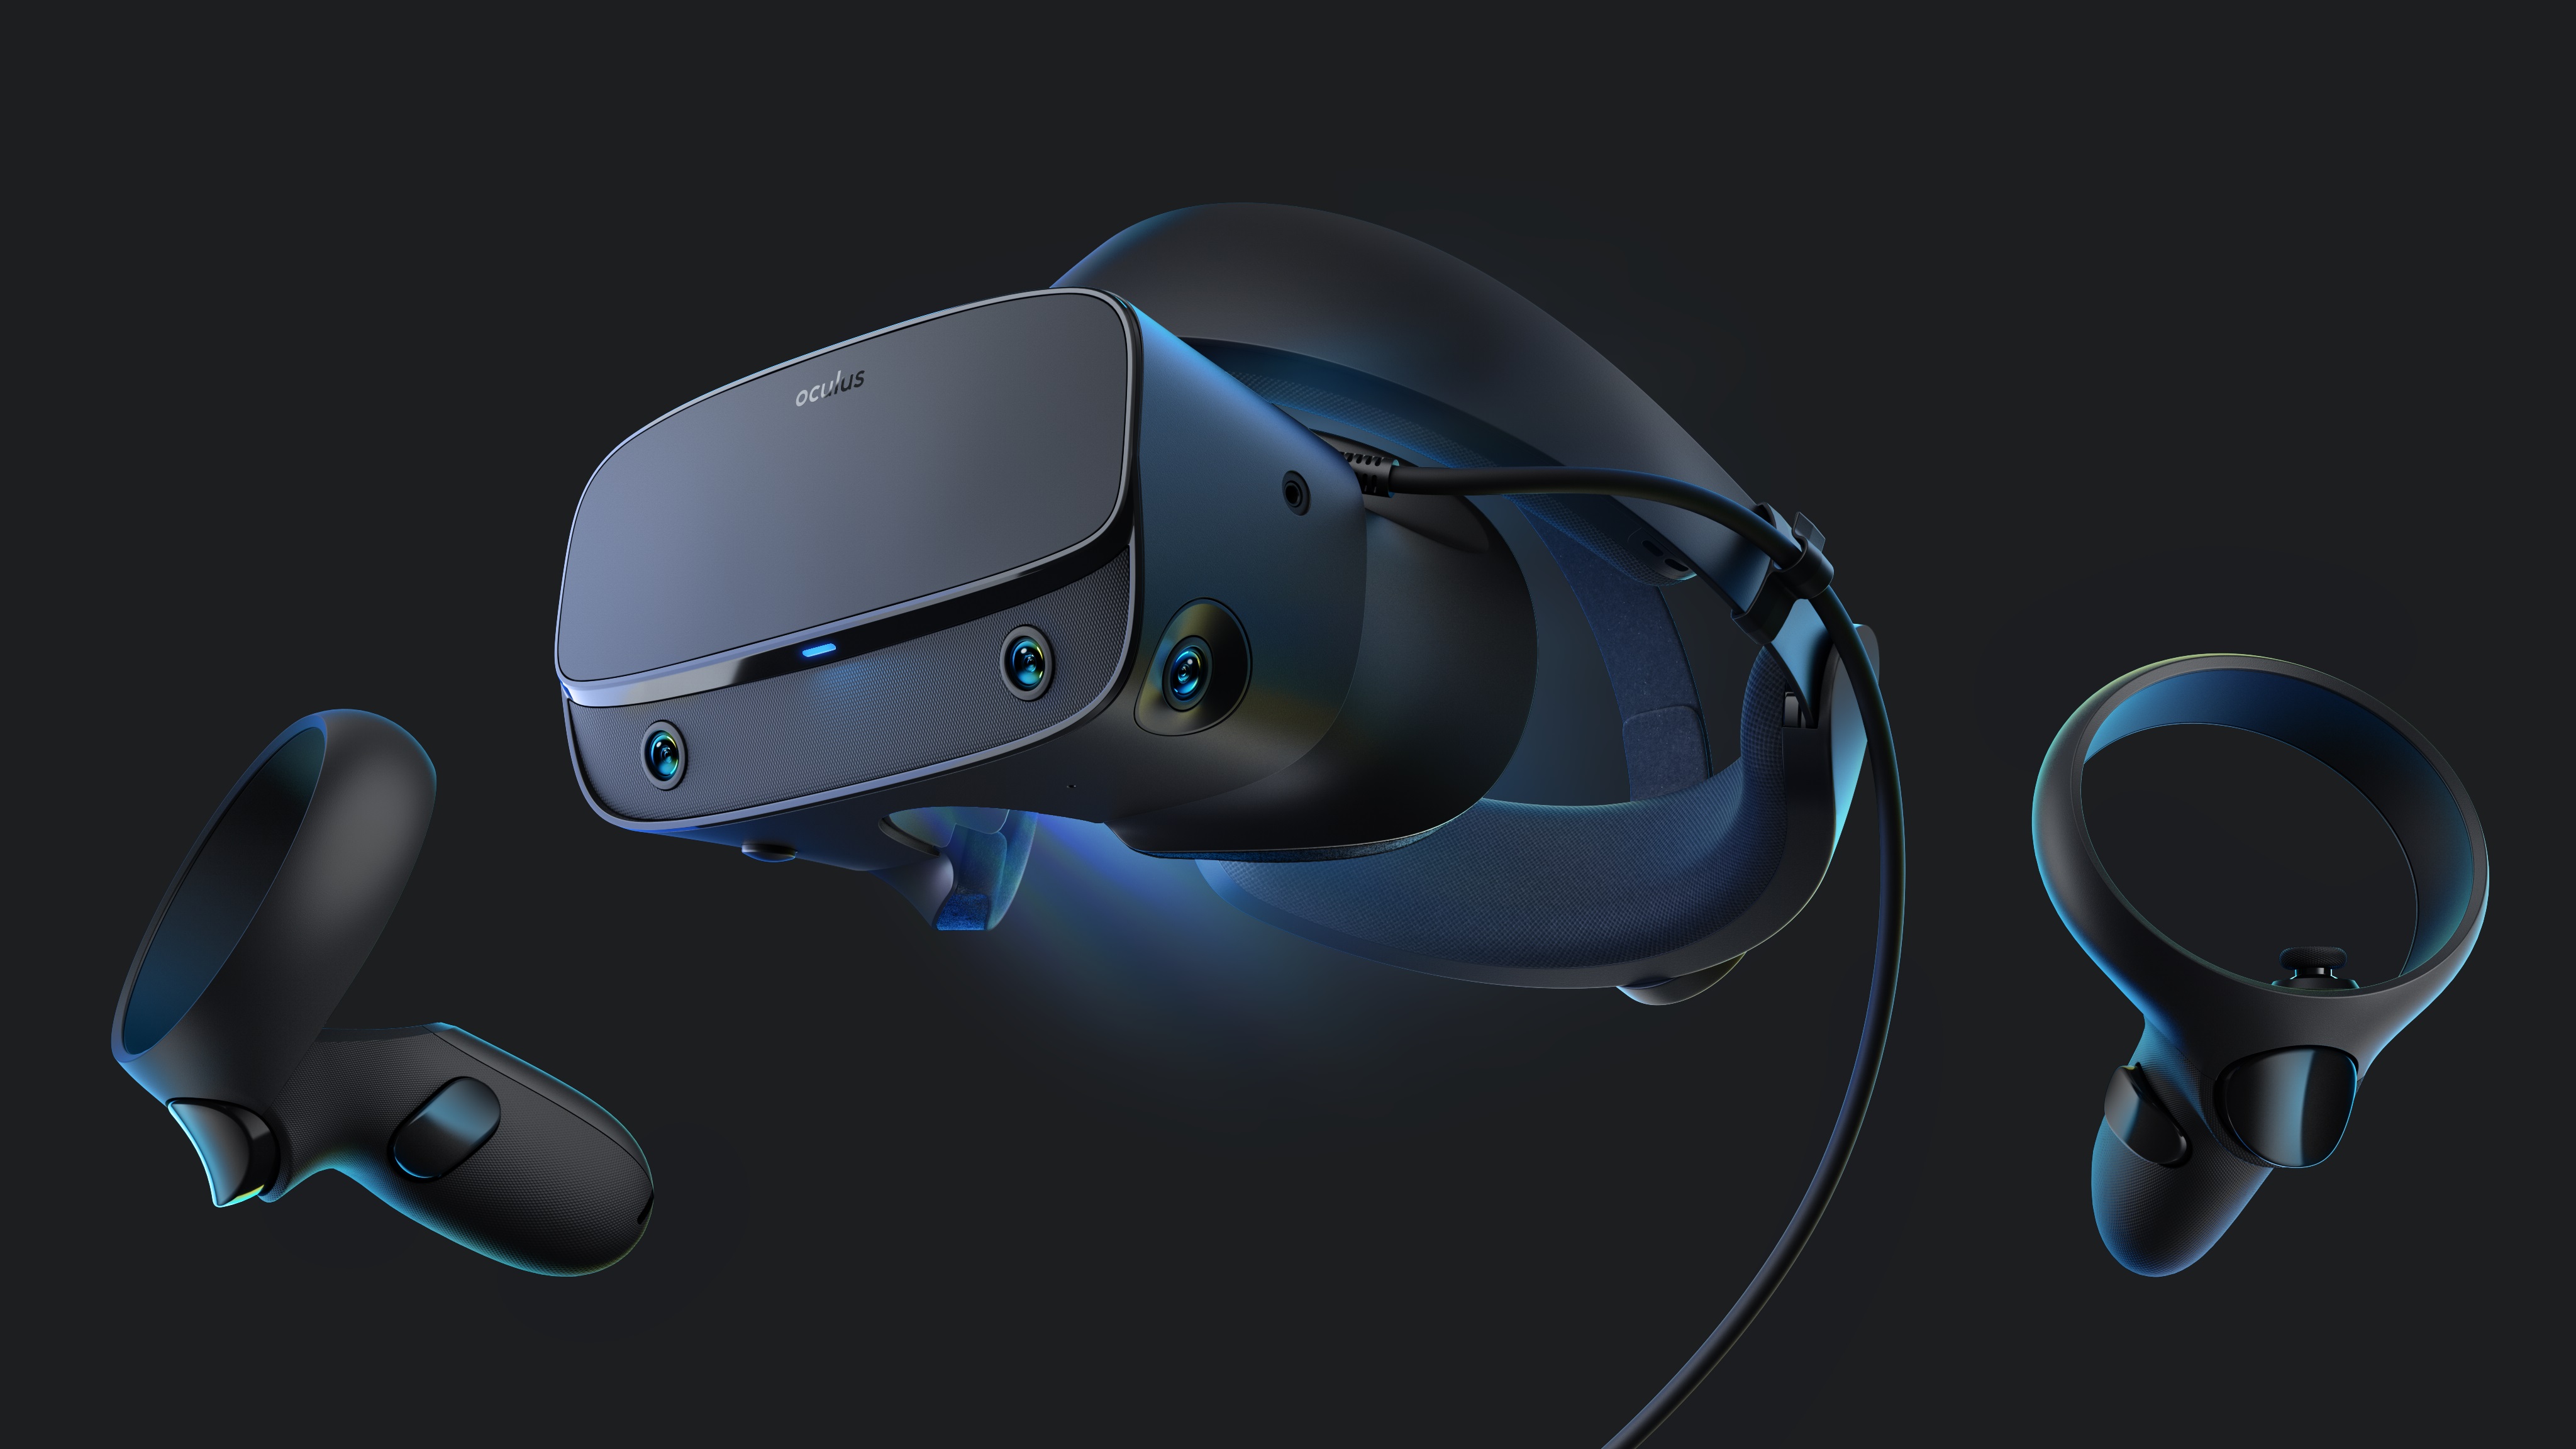 Oculus Rift S with Touch controllers